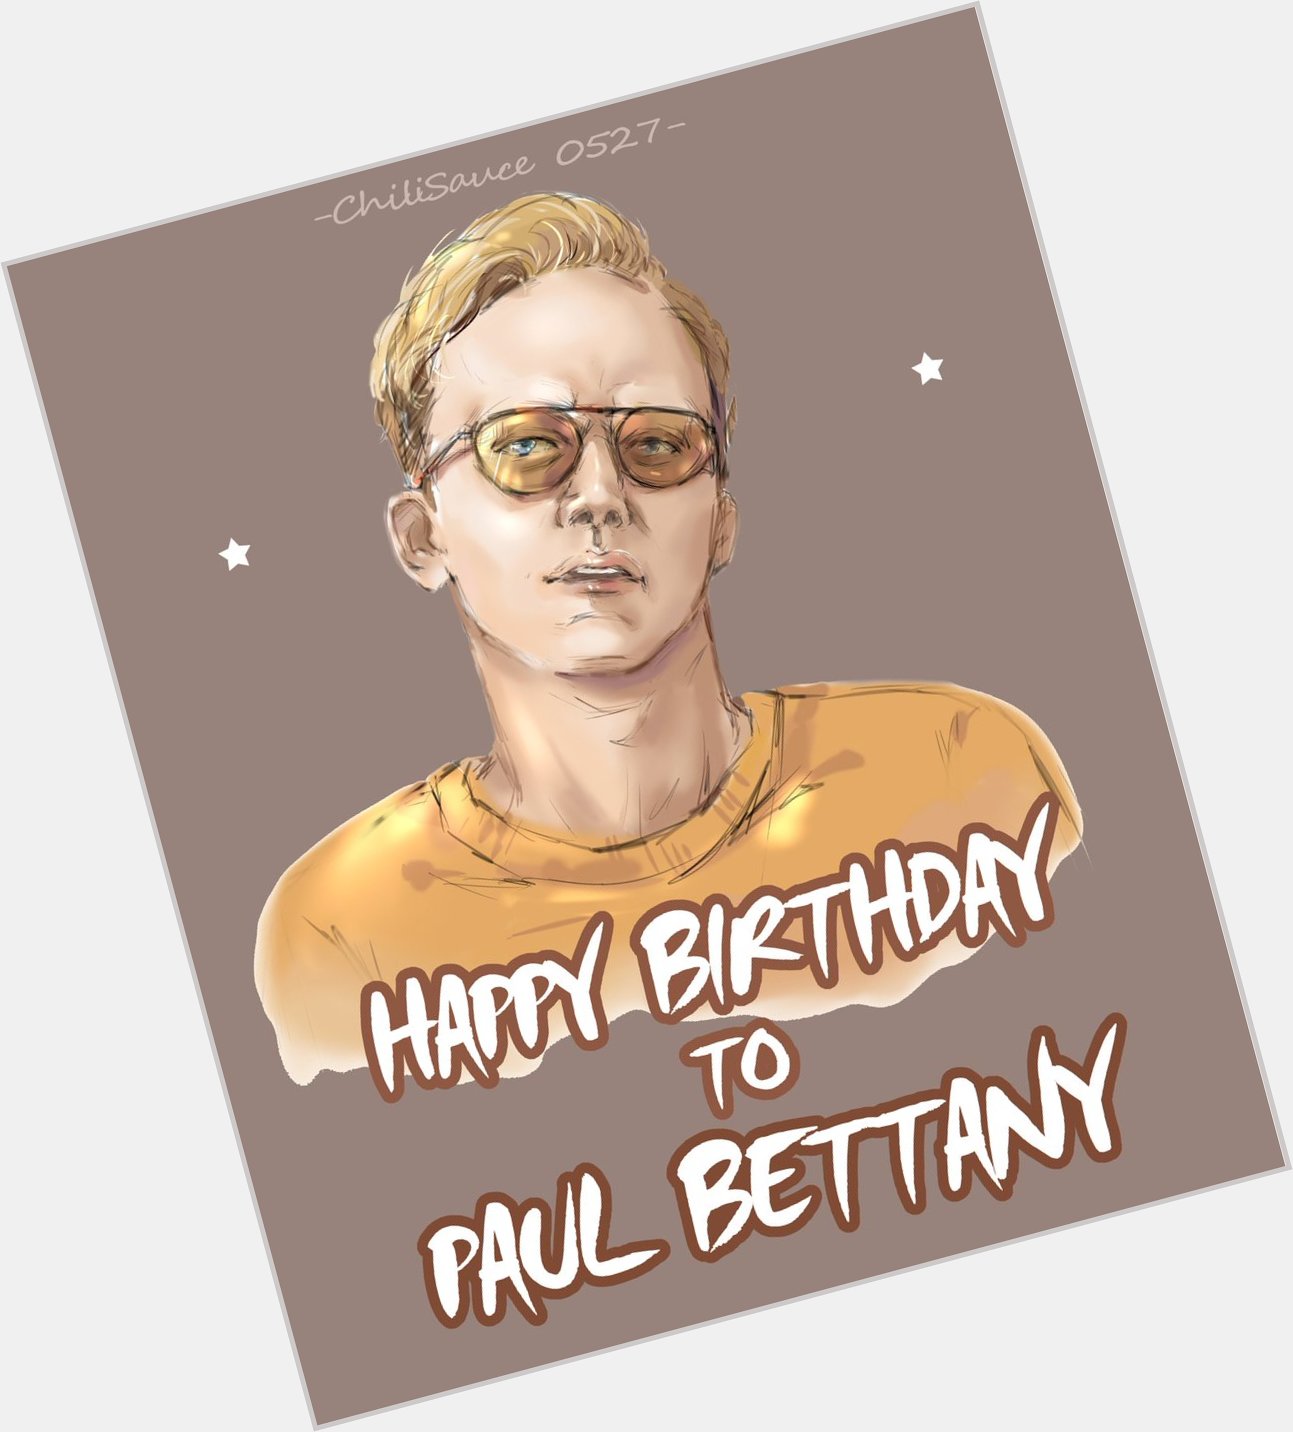 Happy birthday to PAUL BETTANY!!!!!
You deserve the best    